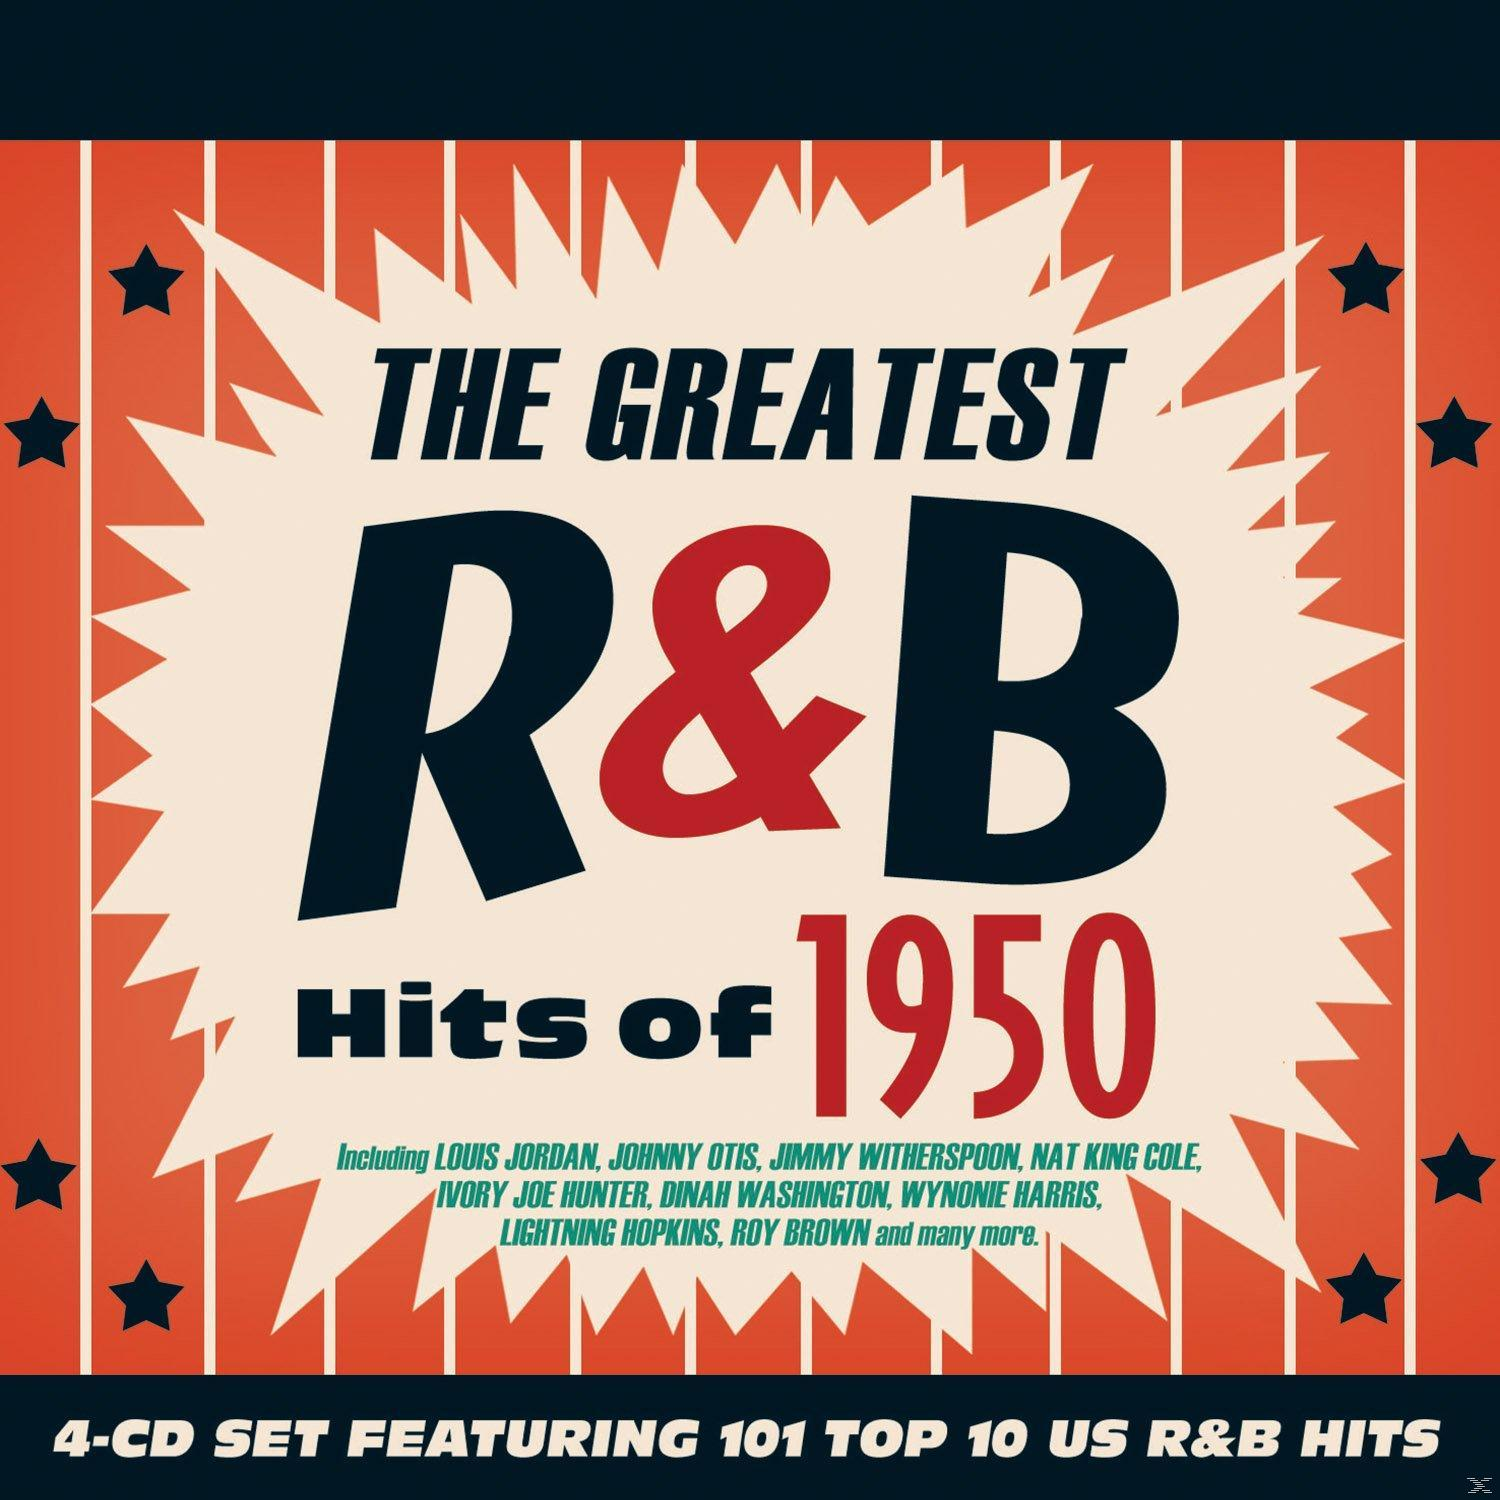 VARIOUS - The Greatest R&B Hits (CD) - Of 1950